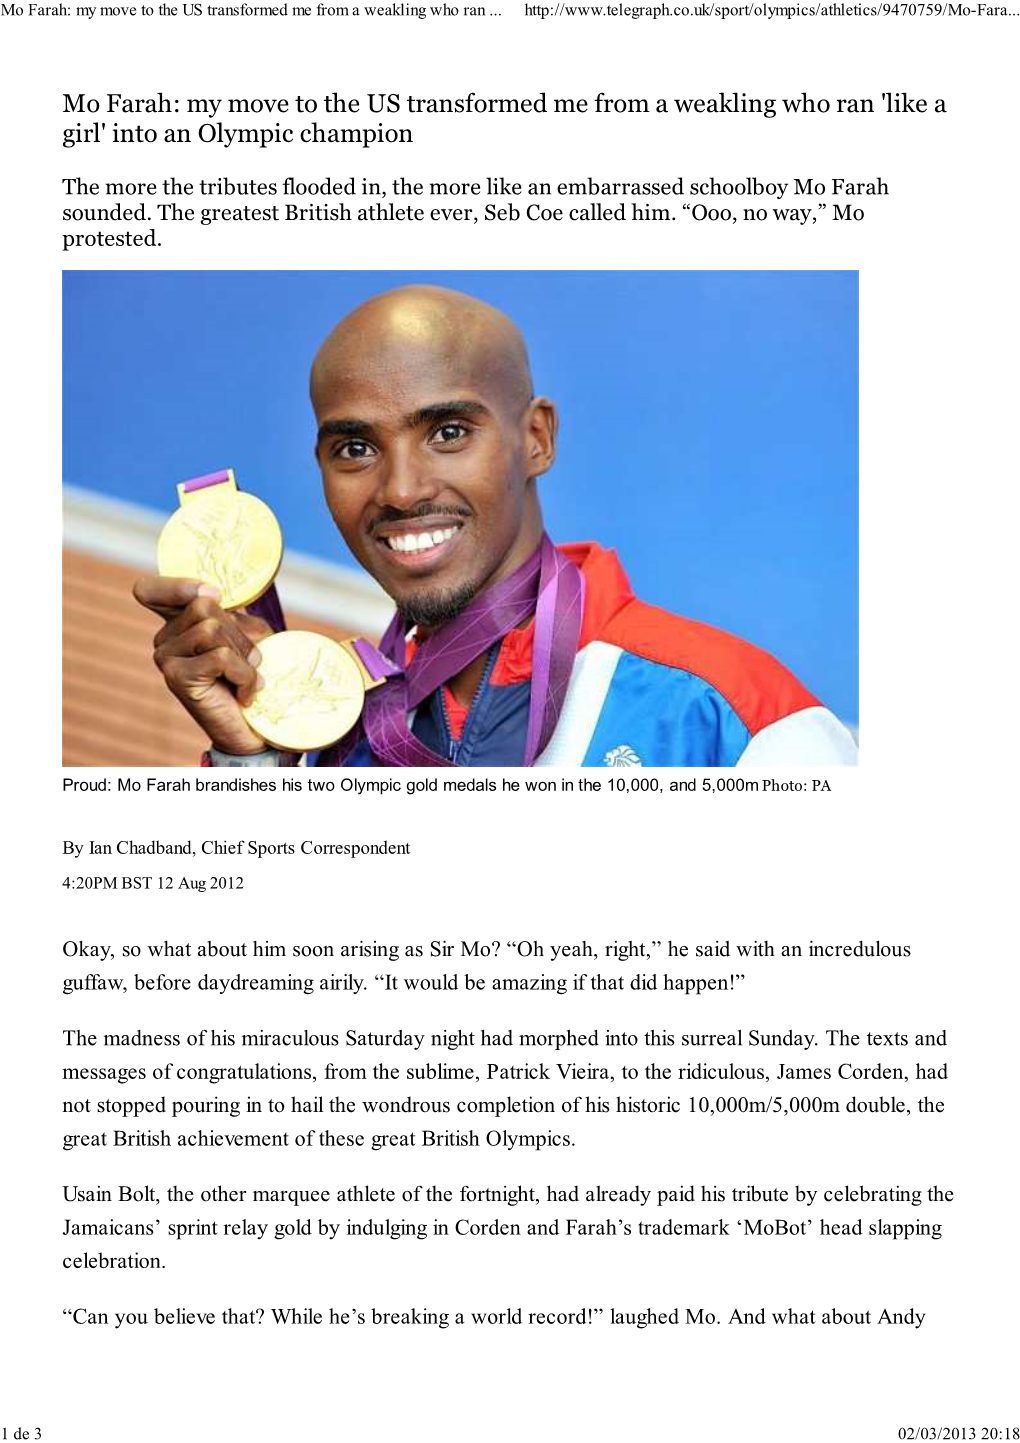 Mo Farah: My Move to the US Transformed Me from a Weakling Who Ran